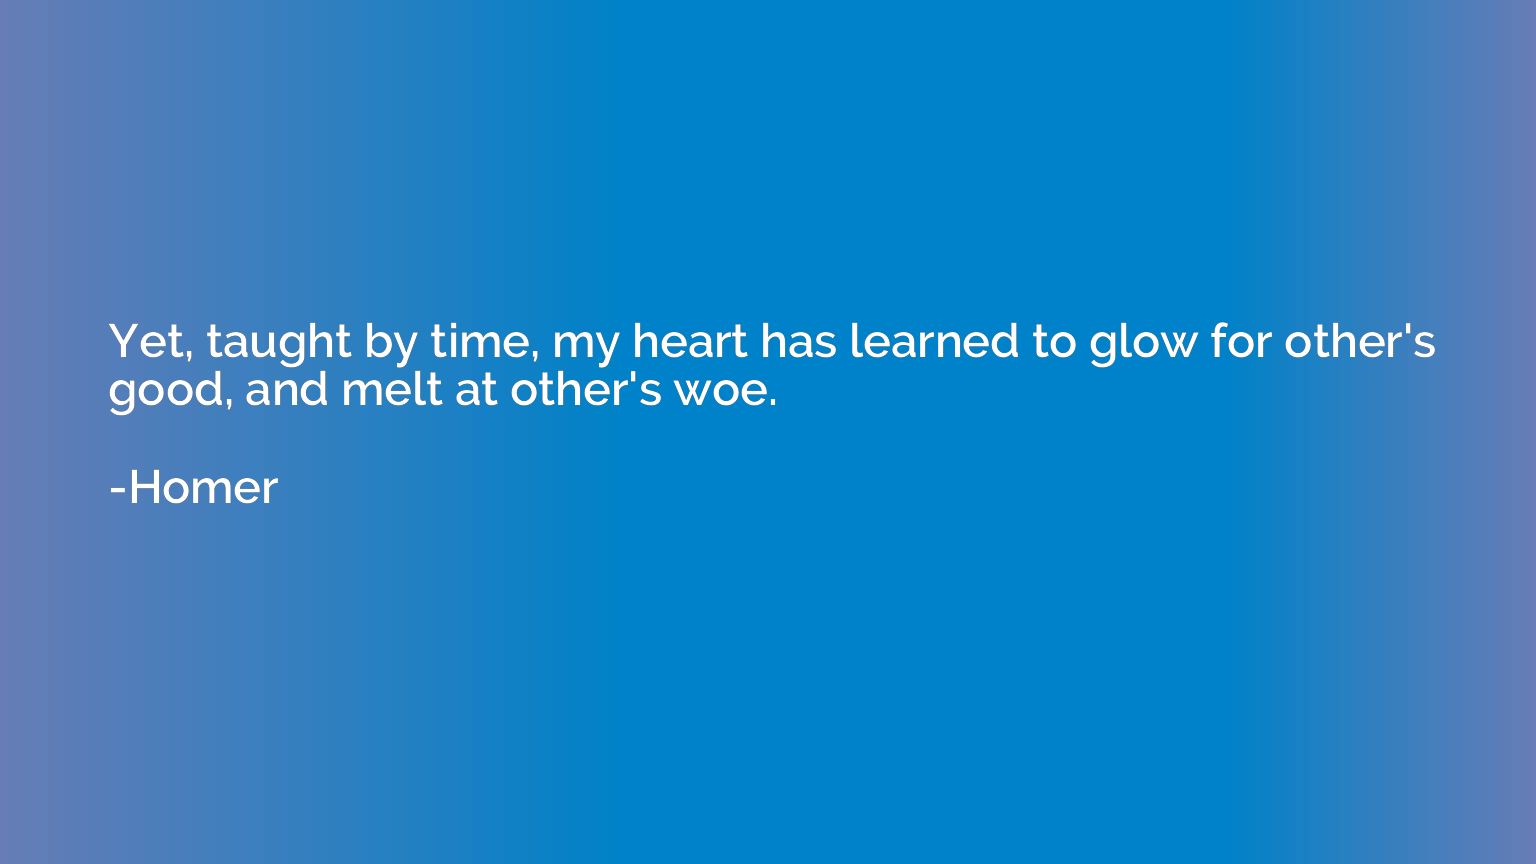 Yet, taught by time, my heart has learned to glow for other'